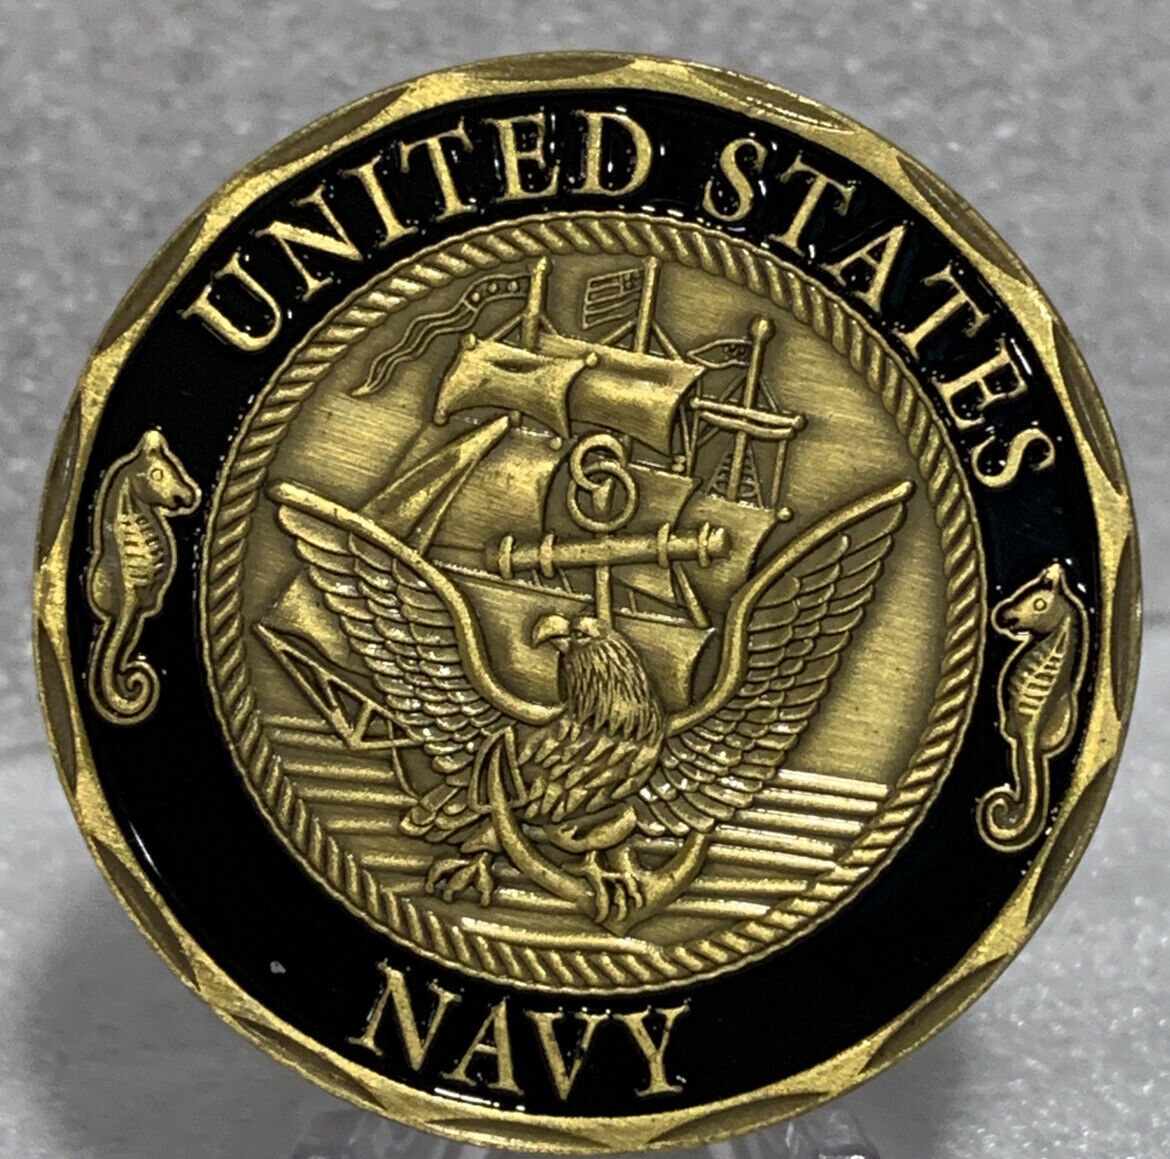 * US Navy Challenge Coin, Shellback US Navy Values Challenge Collectible Coin